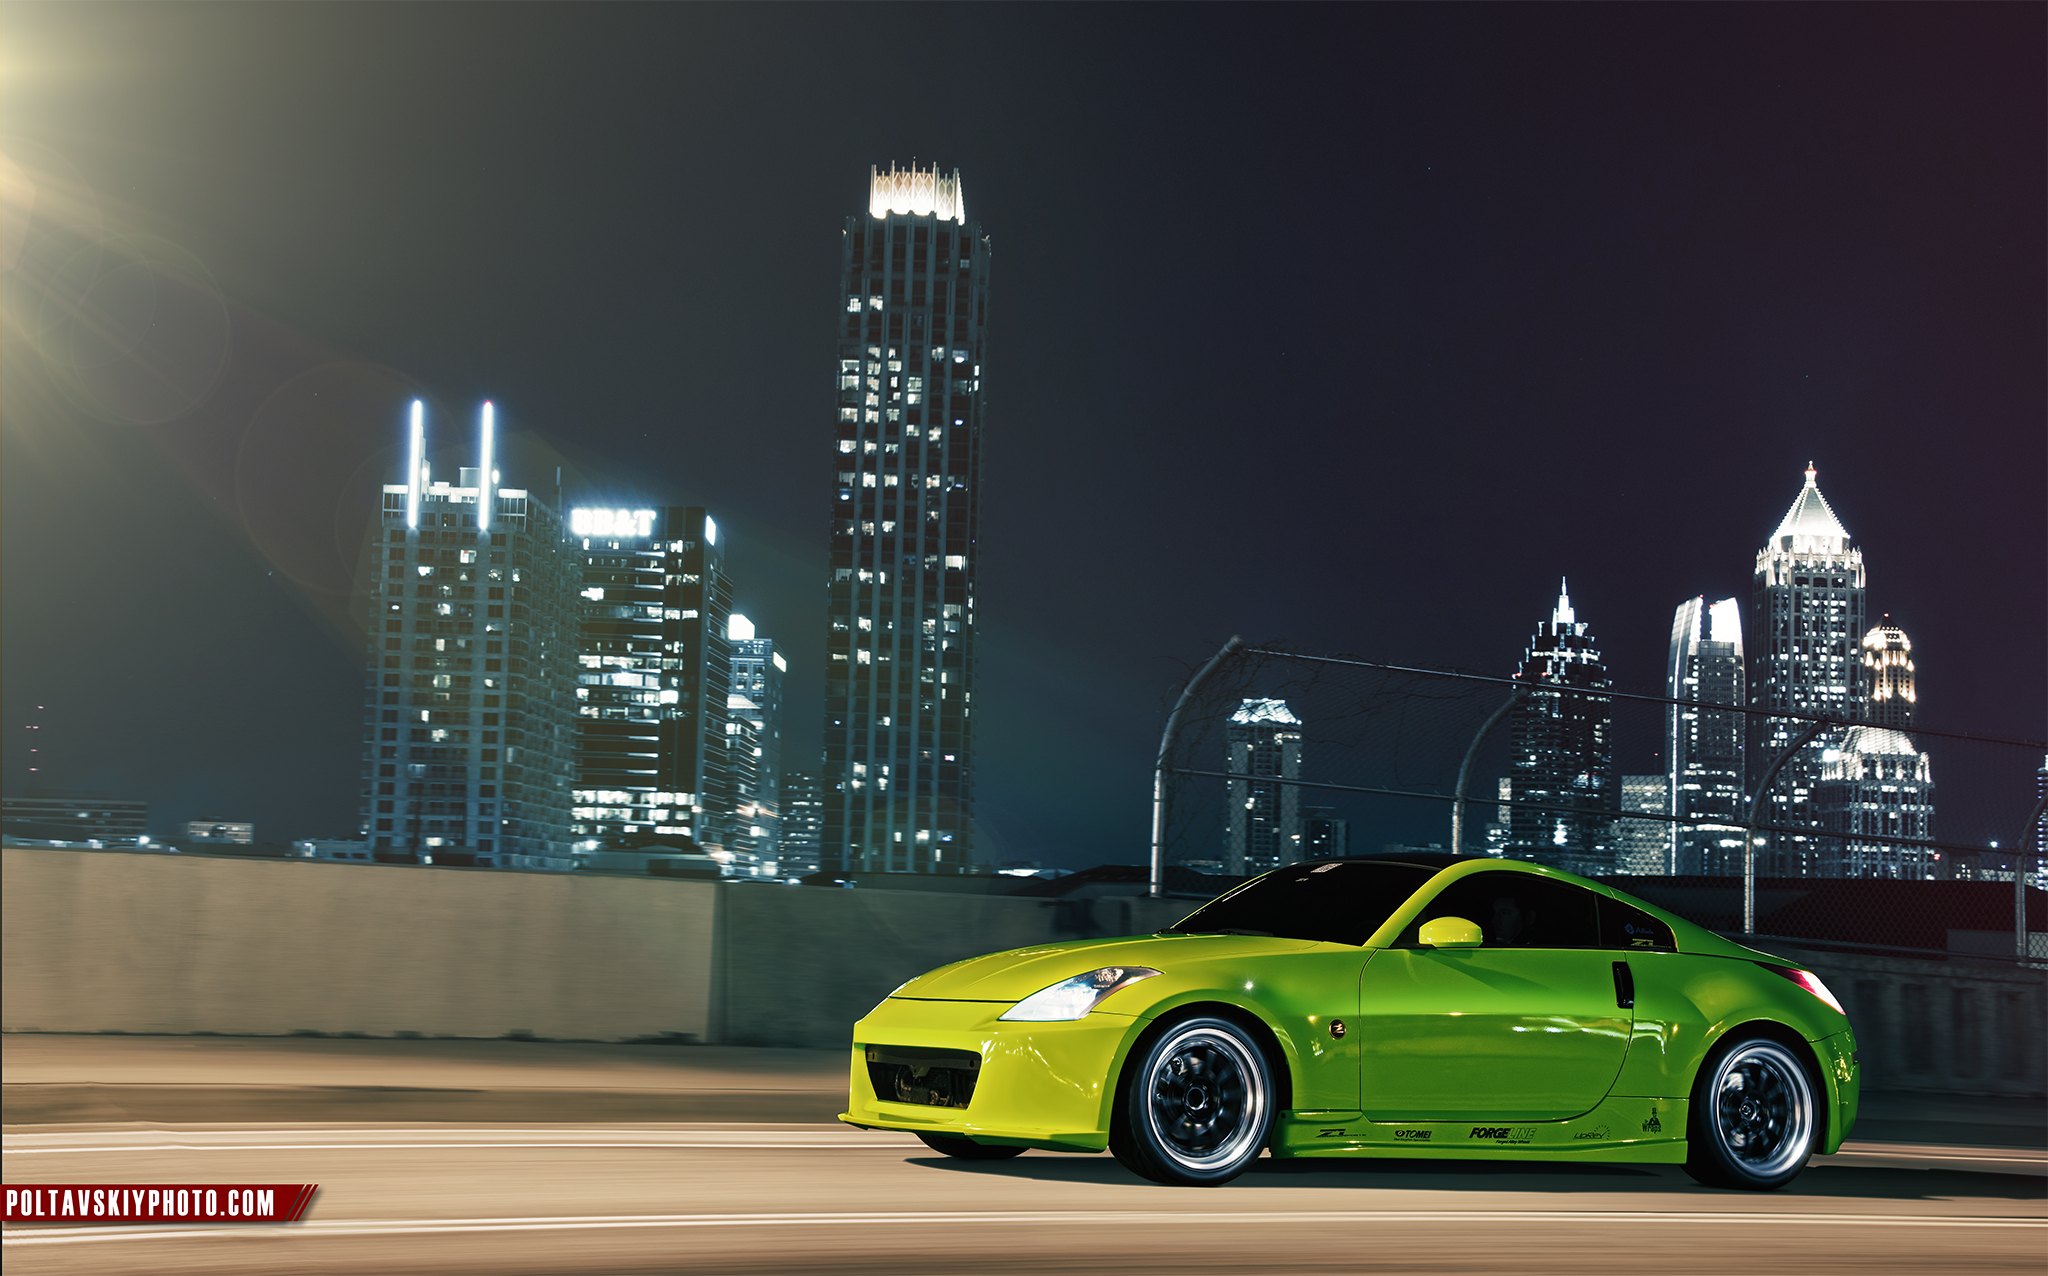 Aftermarket Side Skirts on Lime Green Nissan 350Z - Photo by Forgeline Motorsports